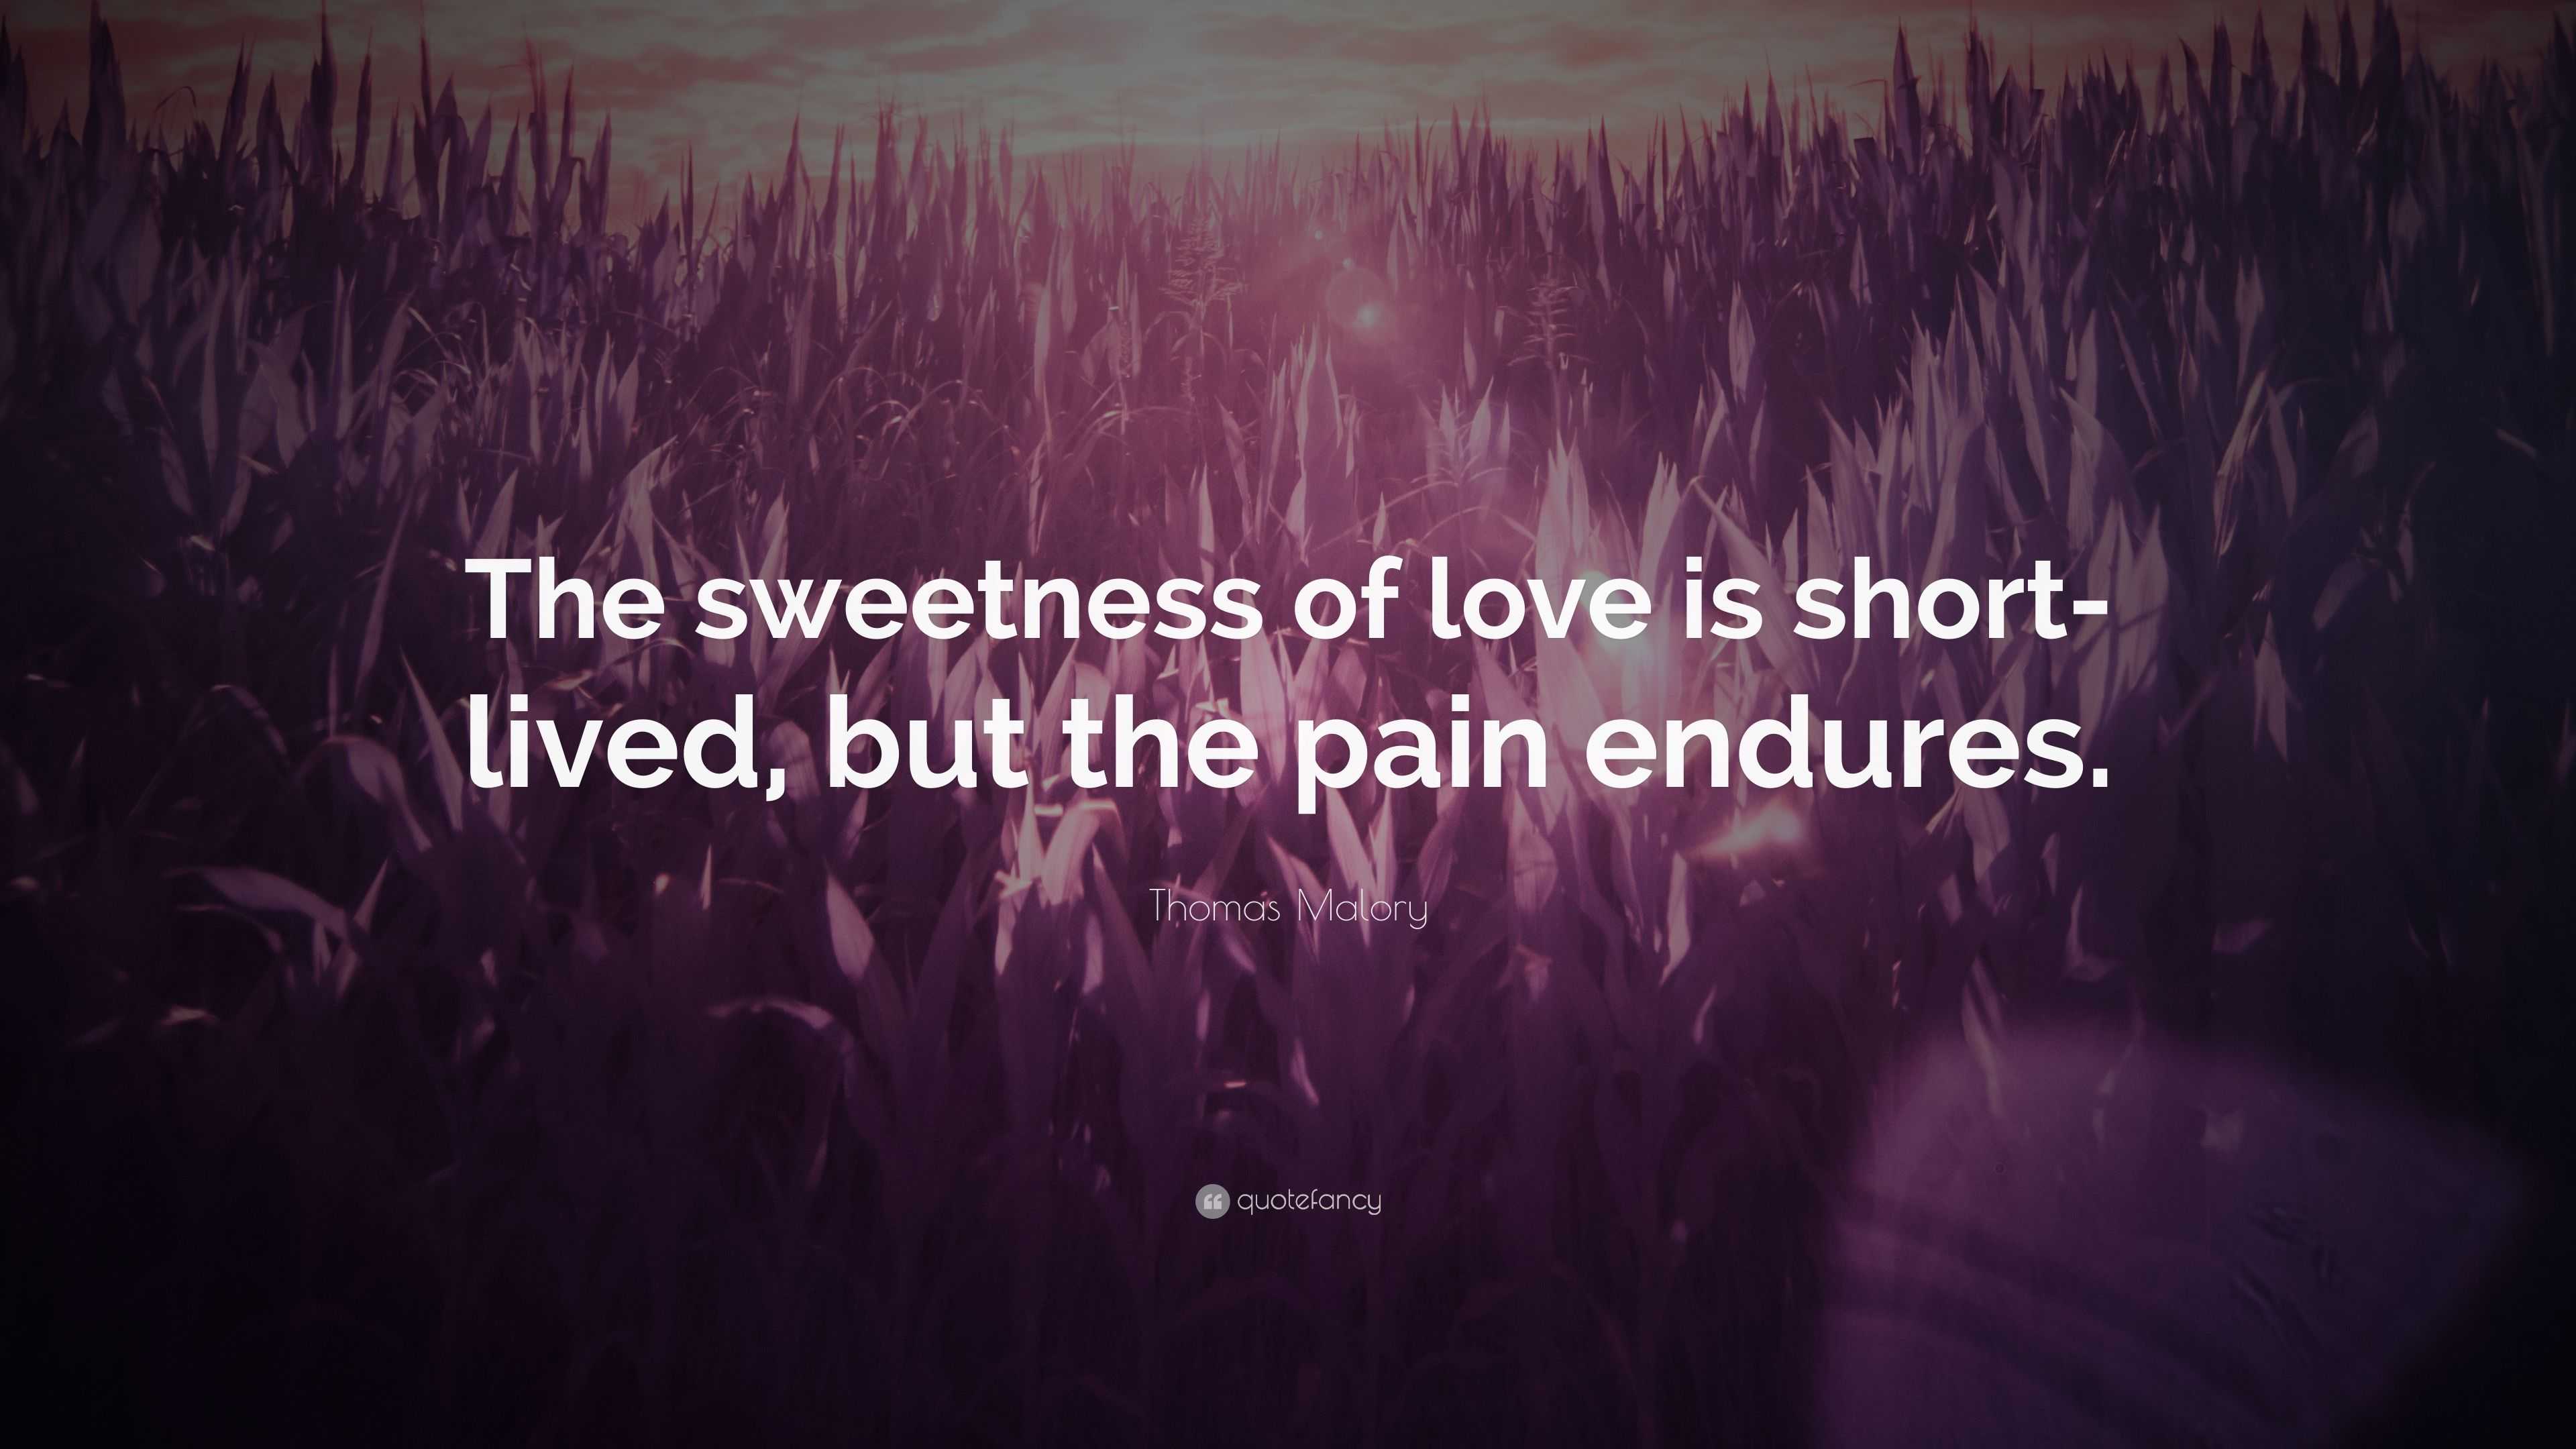 Thomas Malory Quote “The sweetness of love is short lived but the